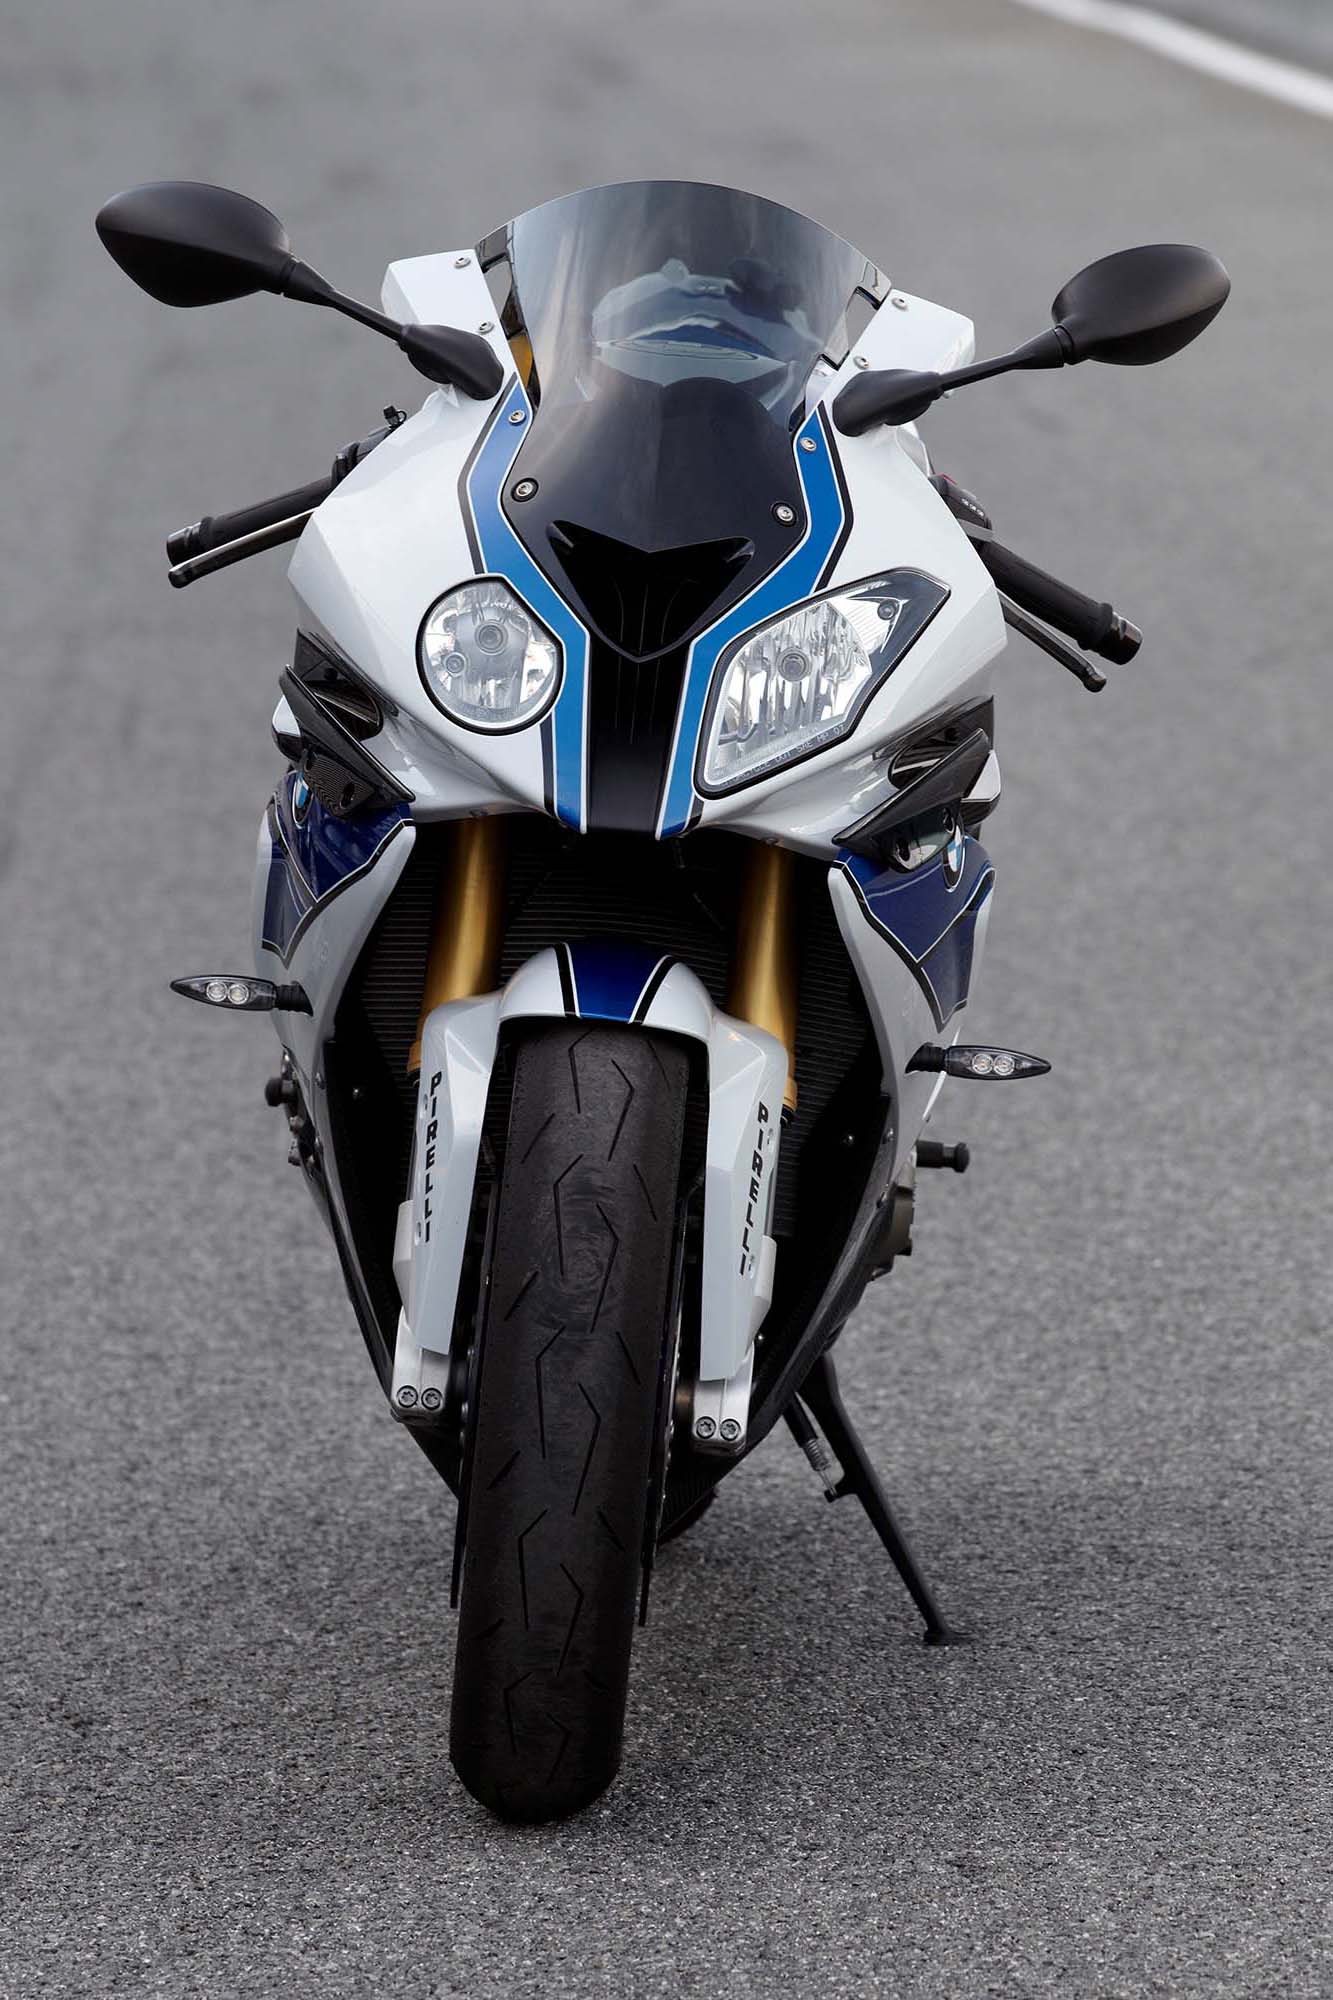 Bmw S1000rr Wallpaper Iphone - Bmw S1000rr Hp4 2014 , HD Wallpaper & Backgrounds